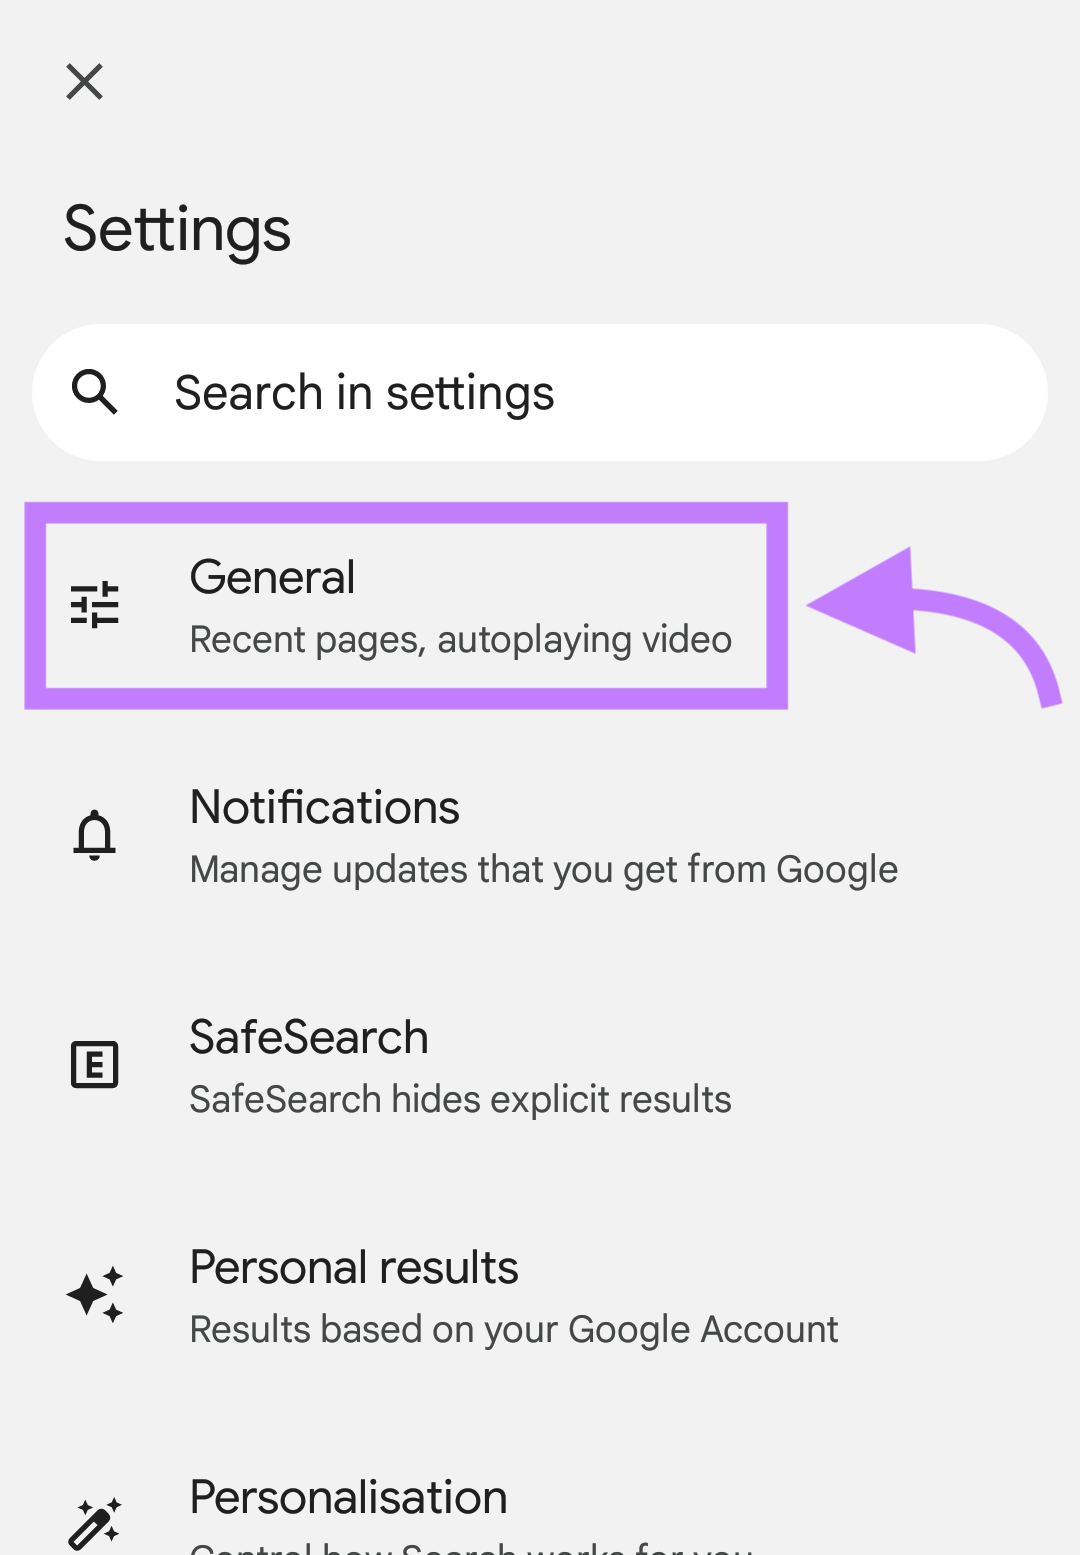 "General" settings for Android devices